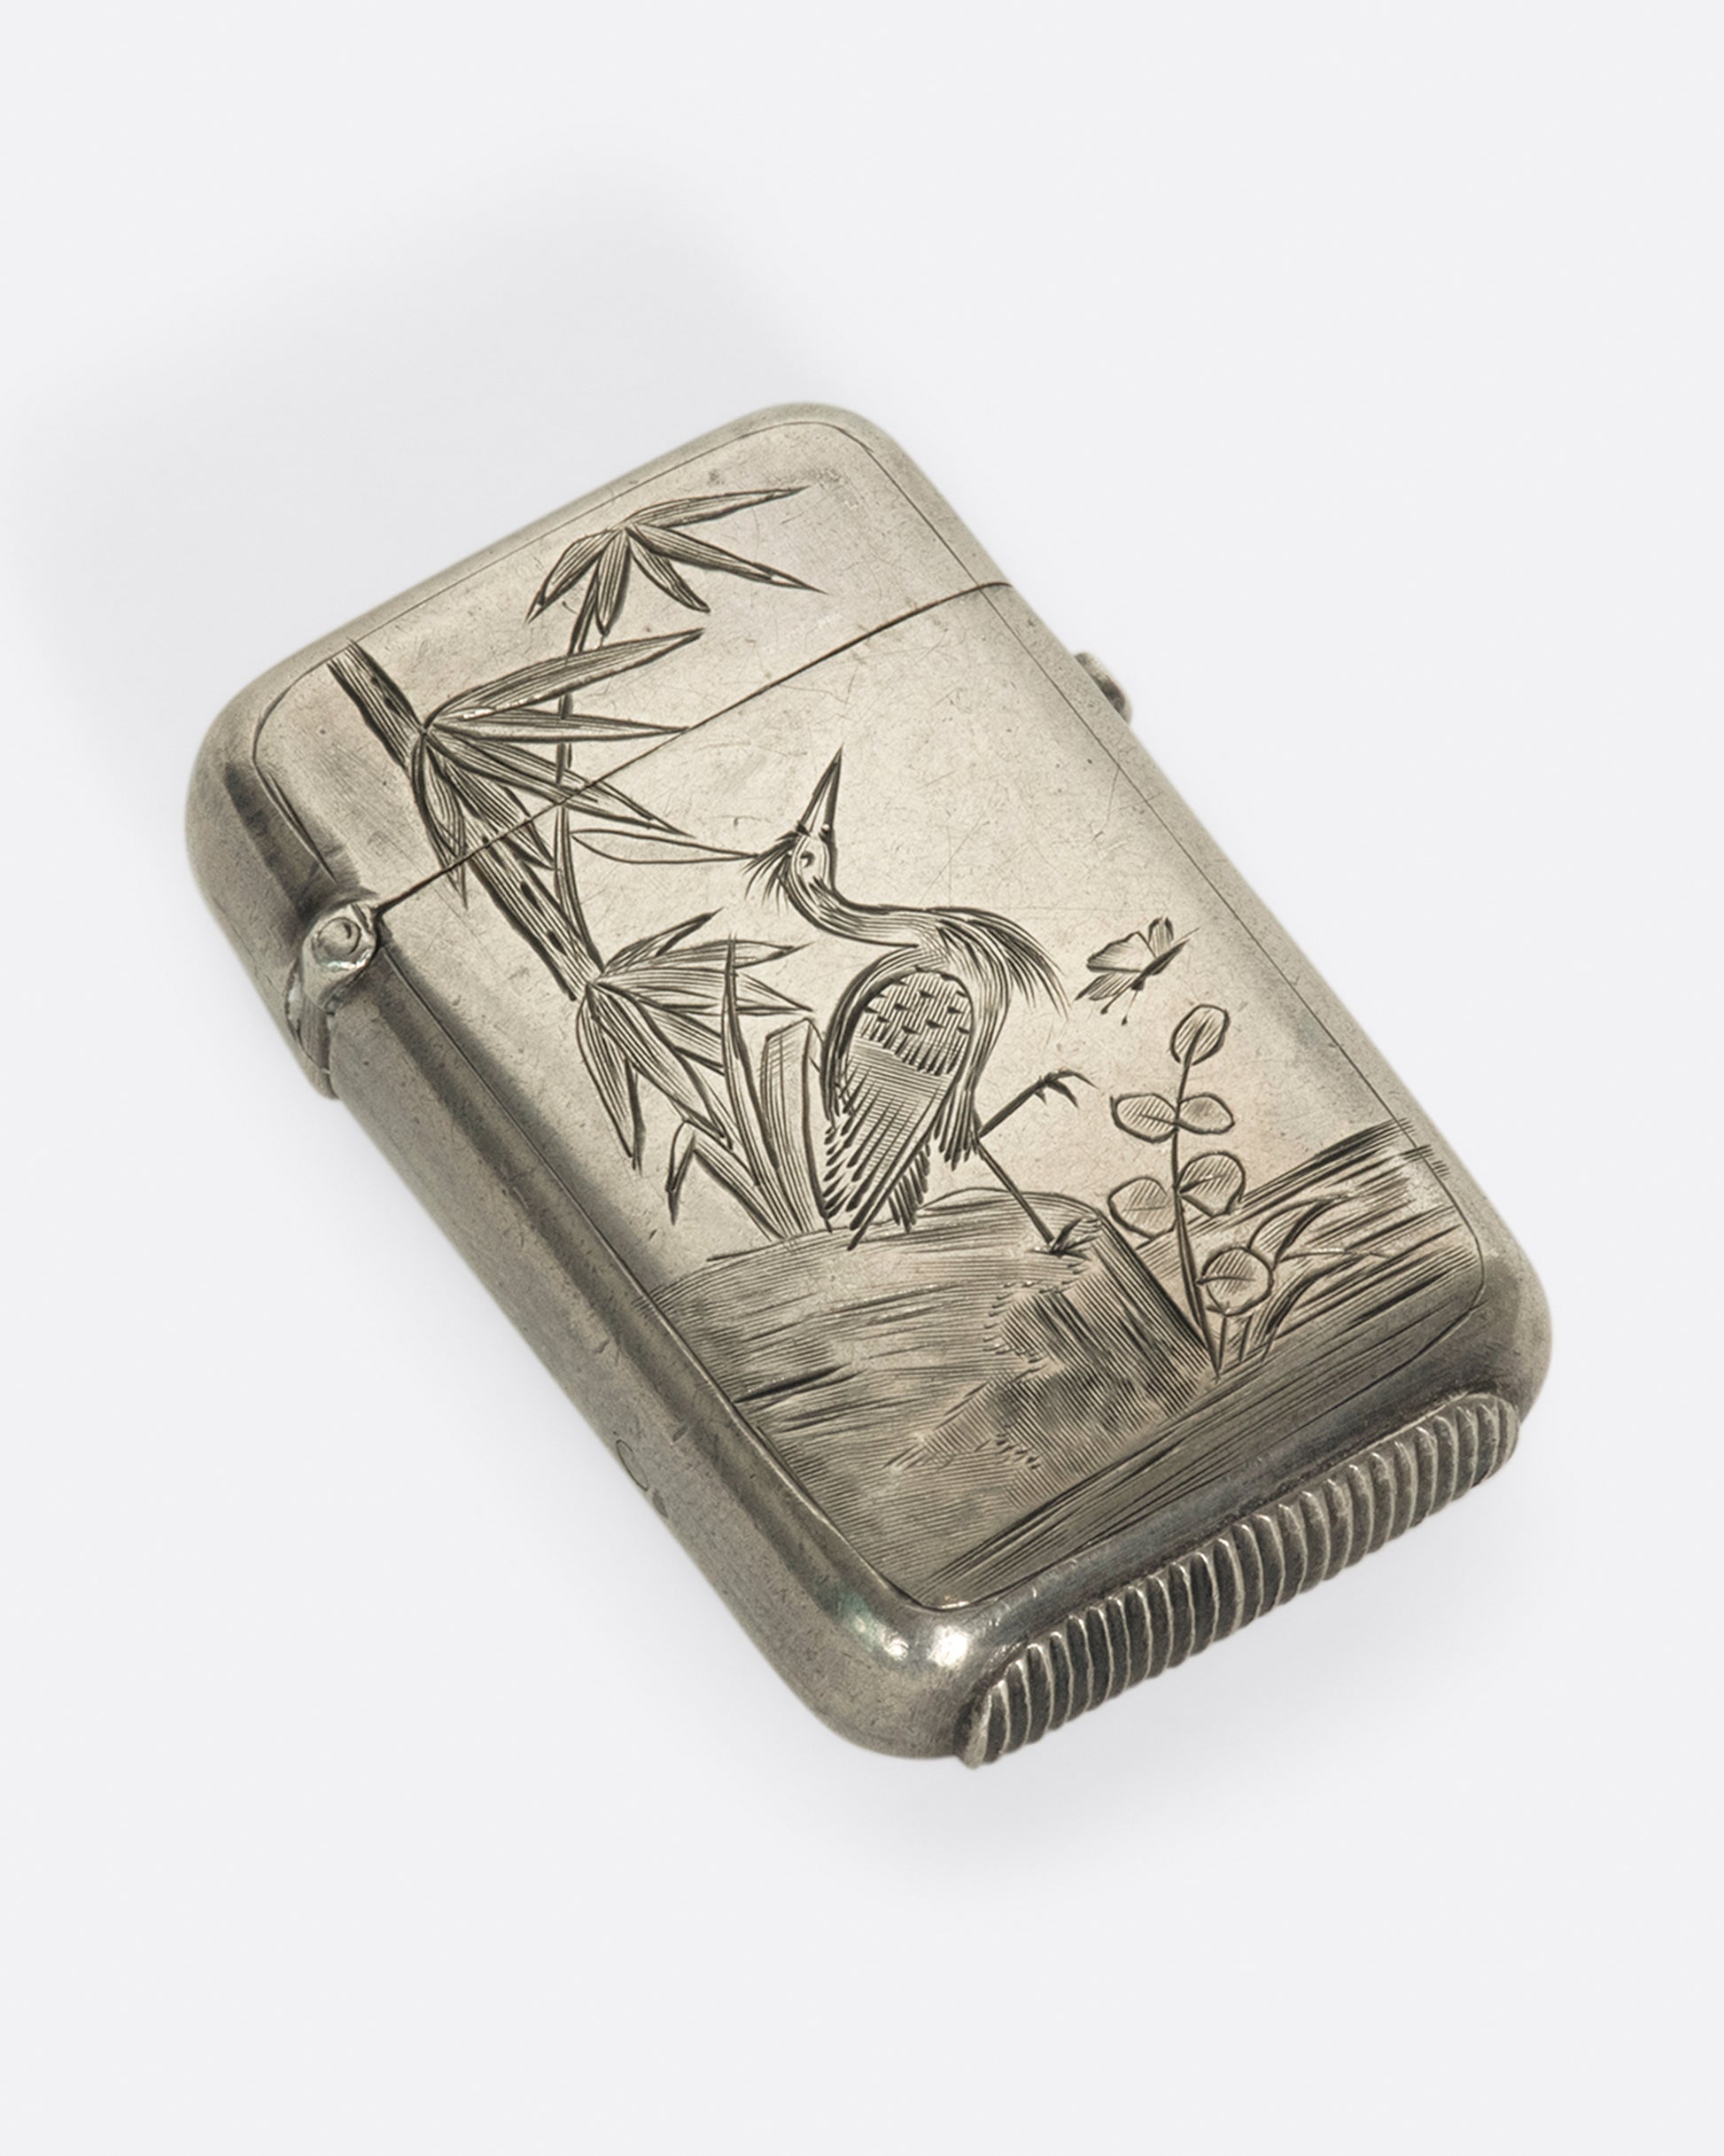 A pocket sized stash box with a hand etched crane, dating back to 1879 Birmingham, England.